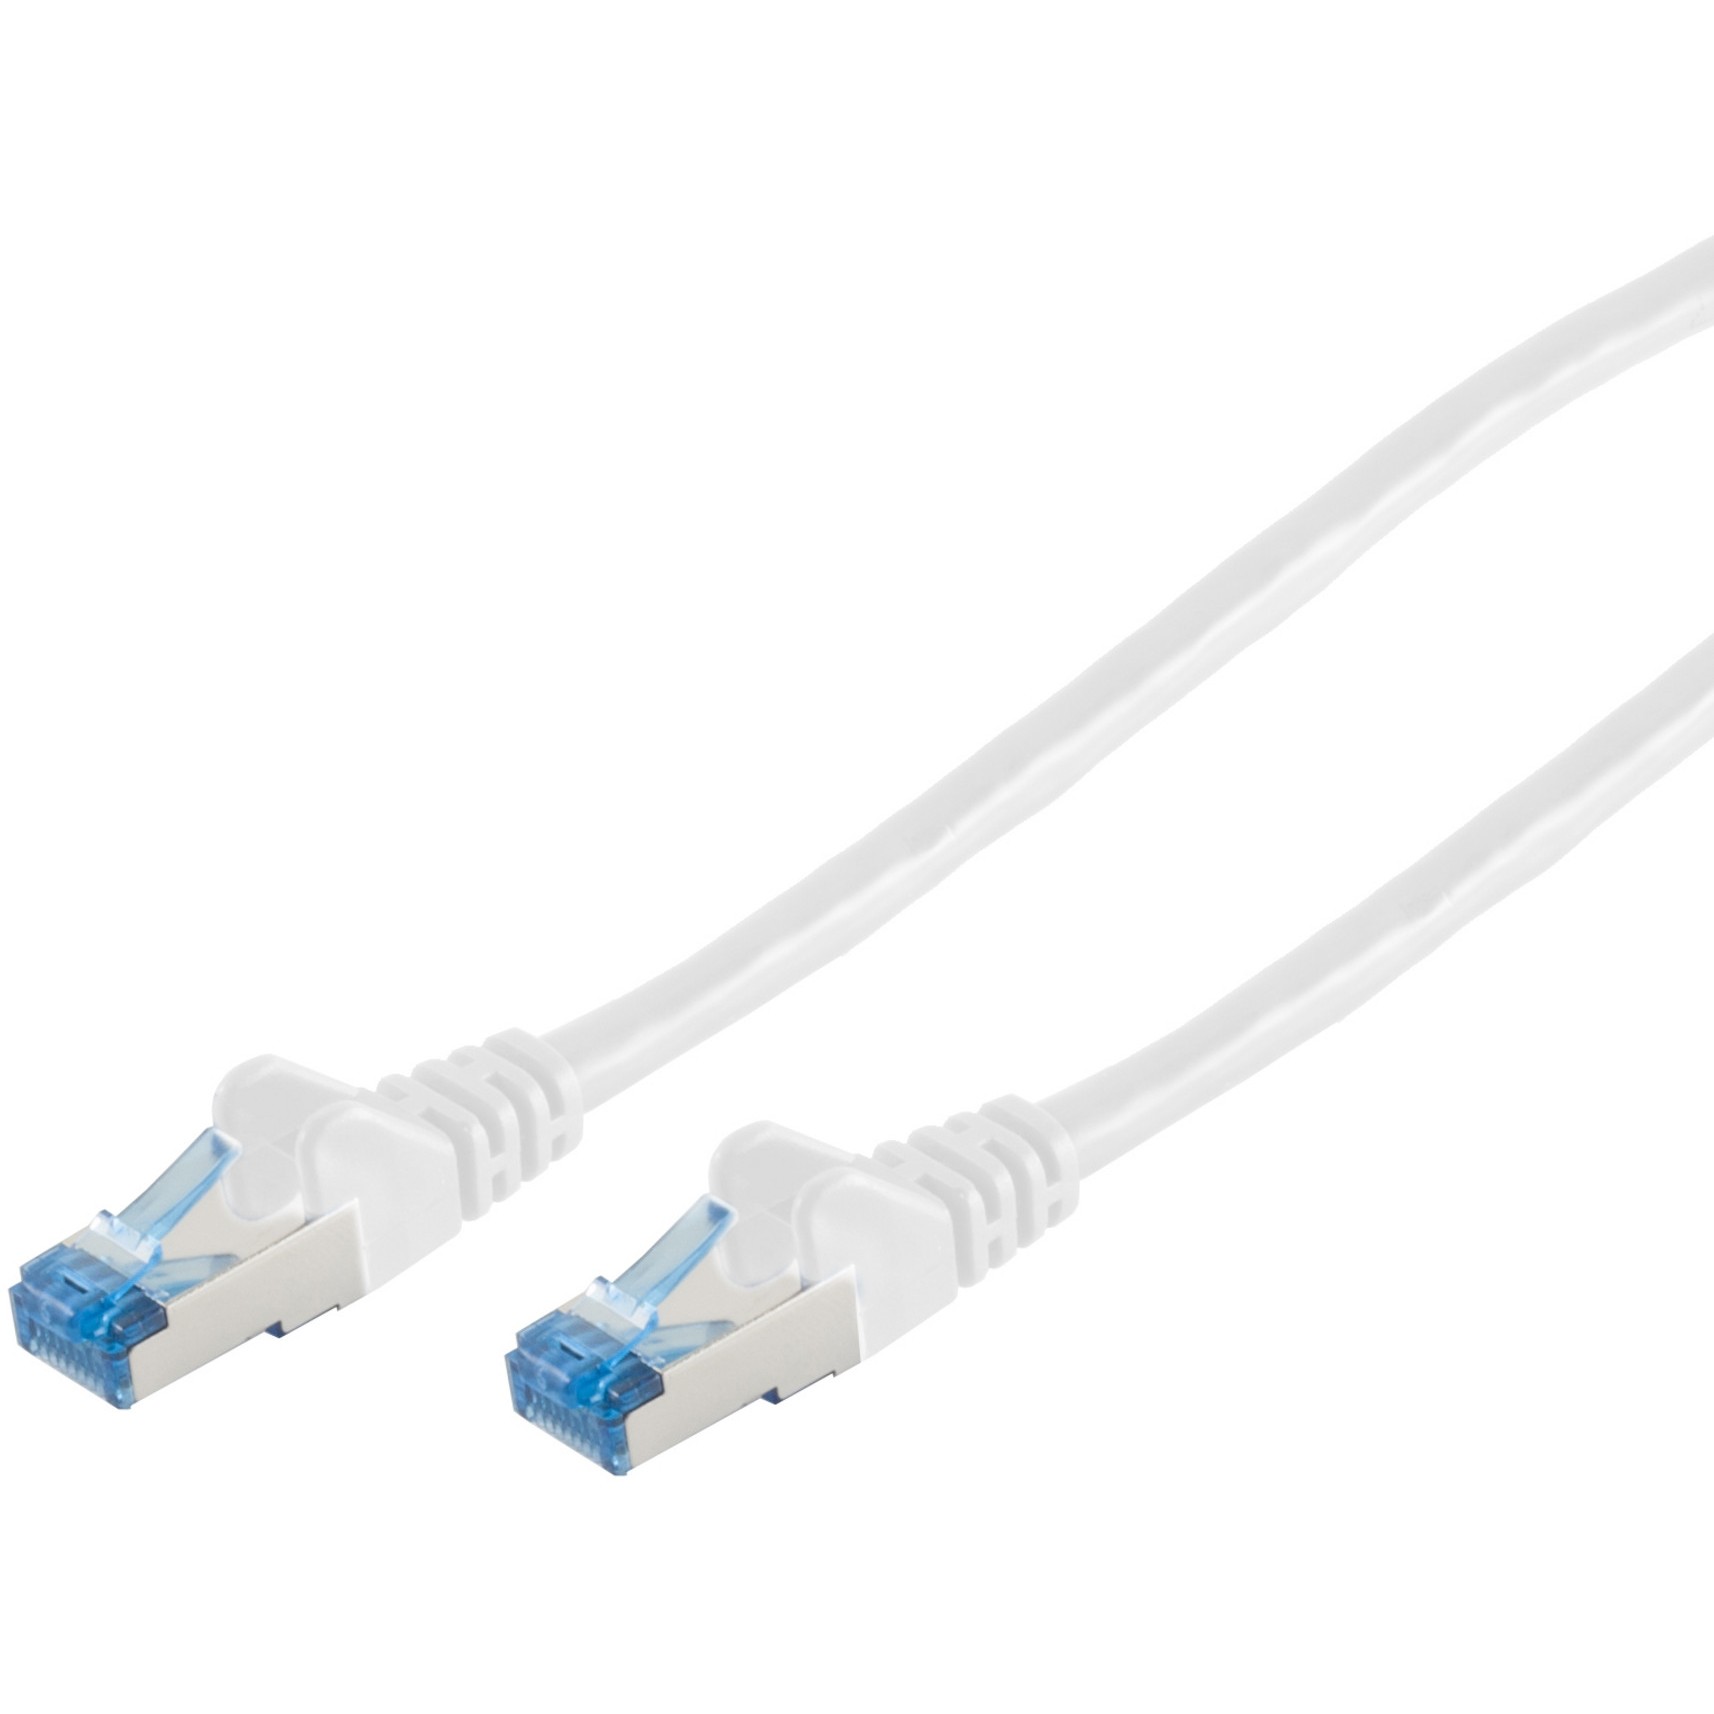 S-Conn 75715-W networking cable